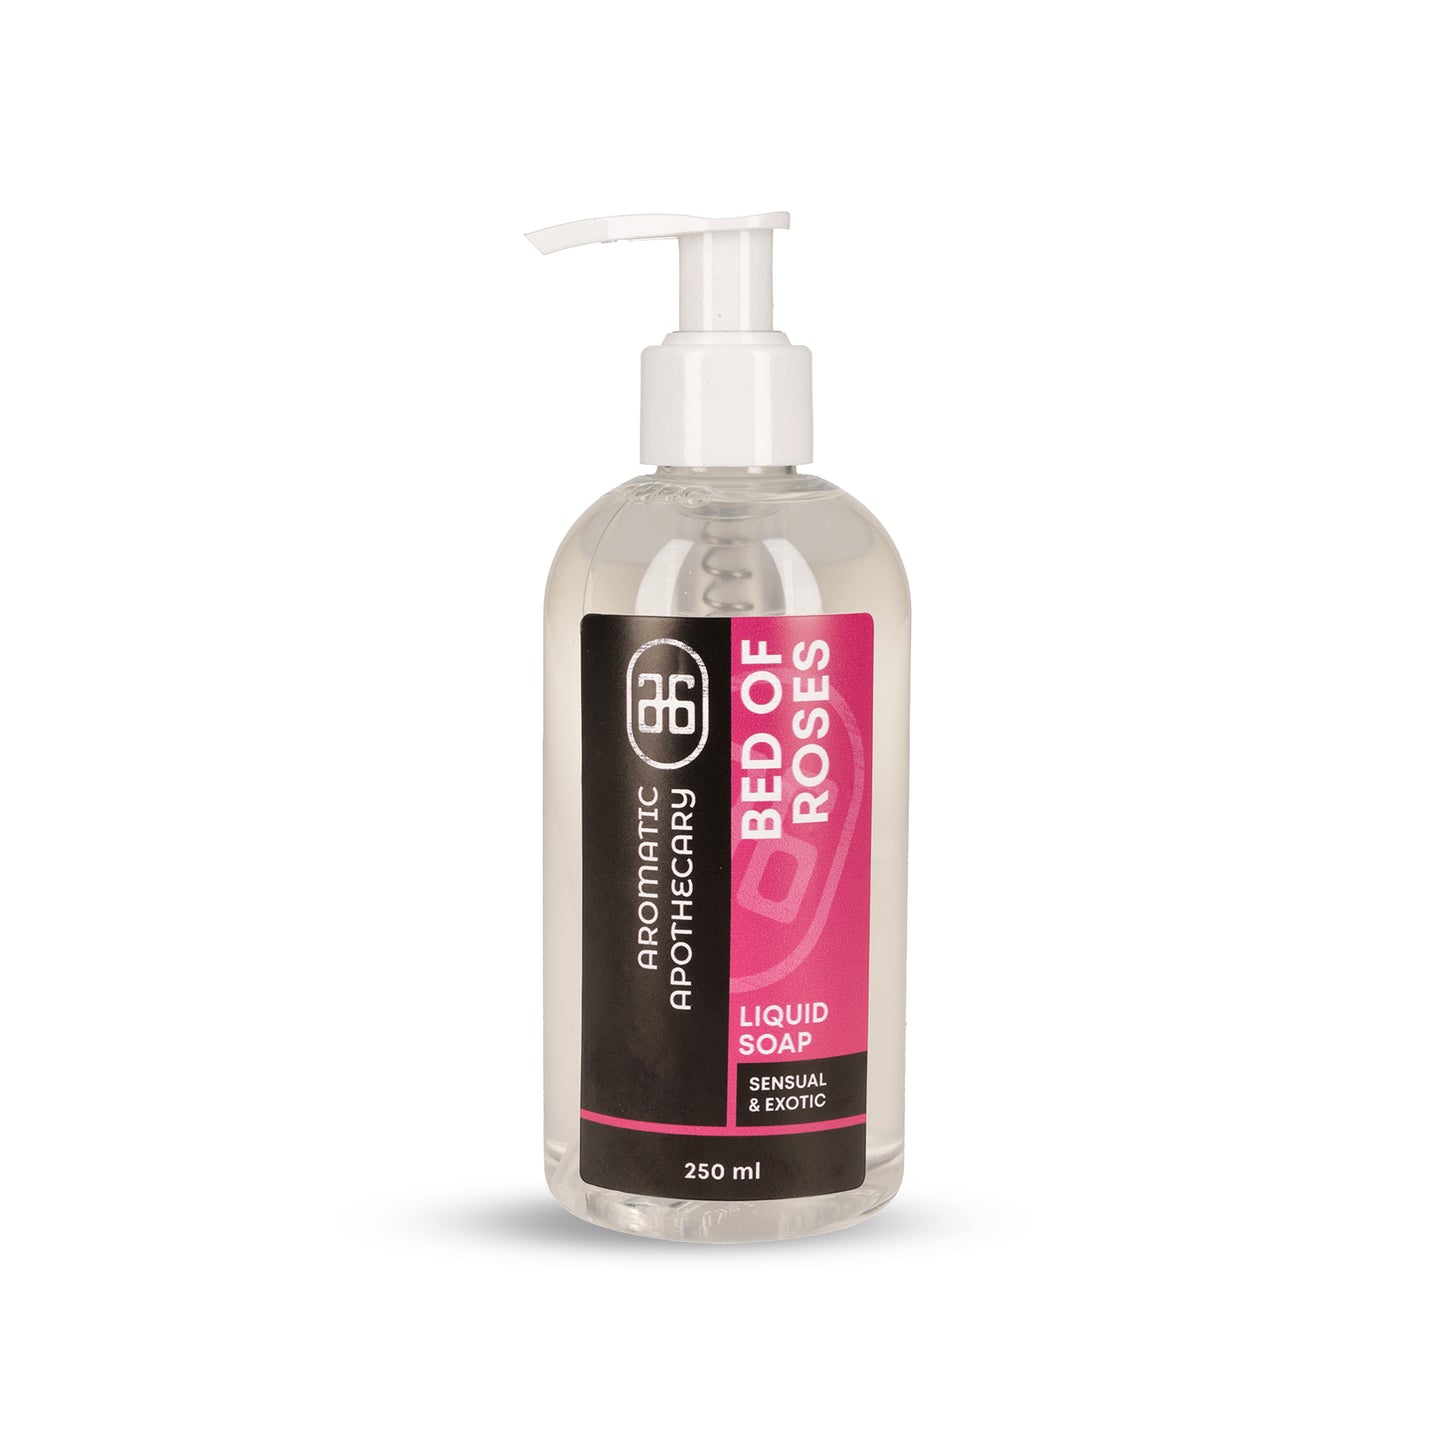 Aromatic Apothecary - Bed of Roses Liquid Soap